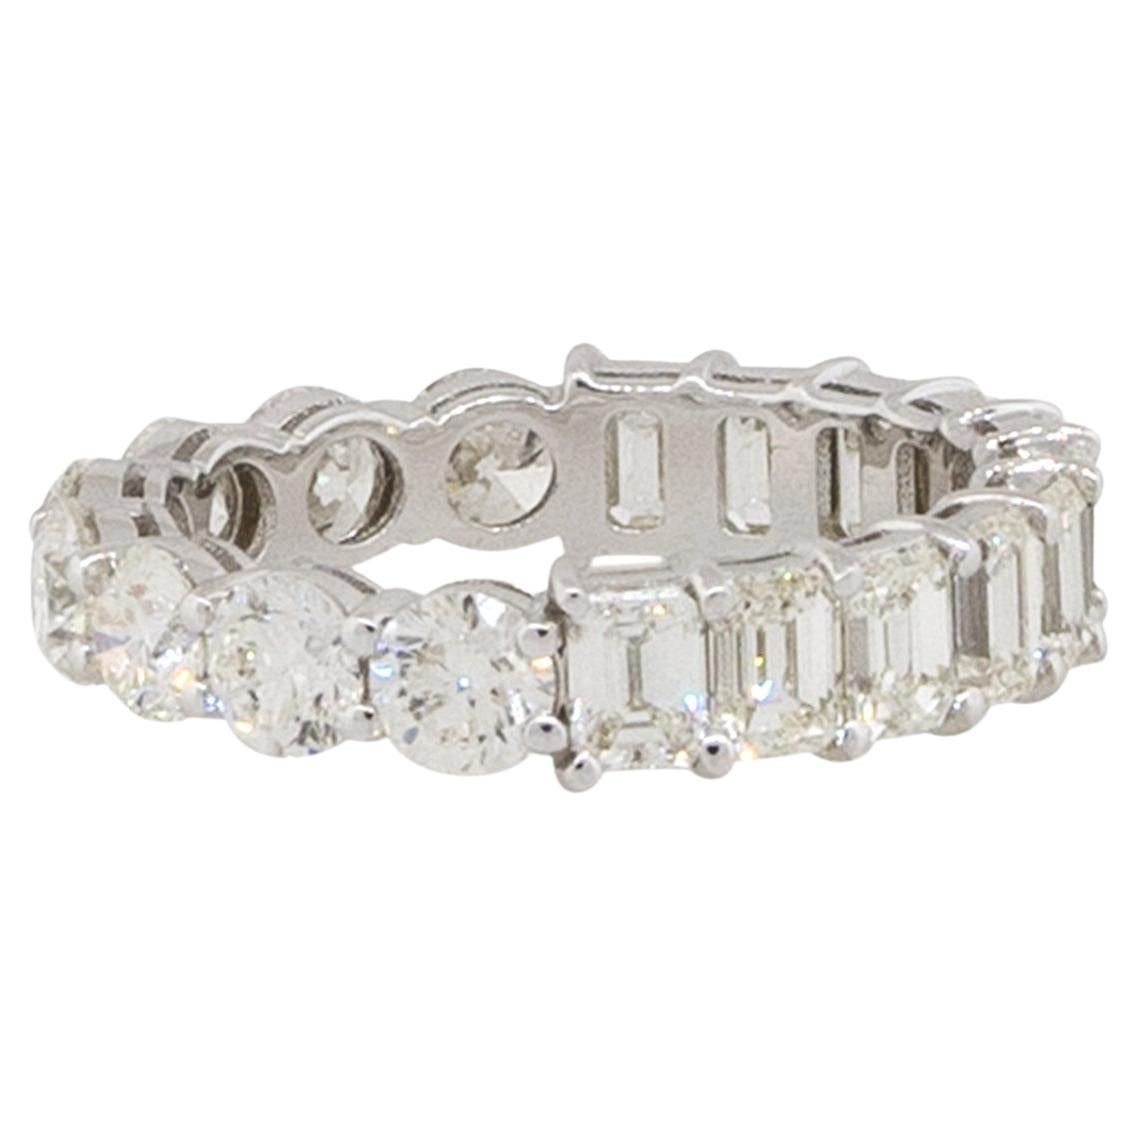 4.61 Carat Round and Emerald Cut Diamond Eternity Band Ring 14 Karat In Stock For Sale